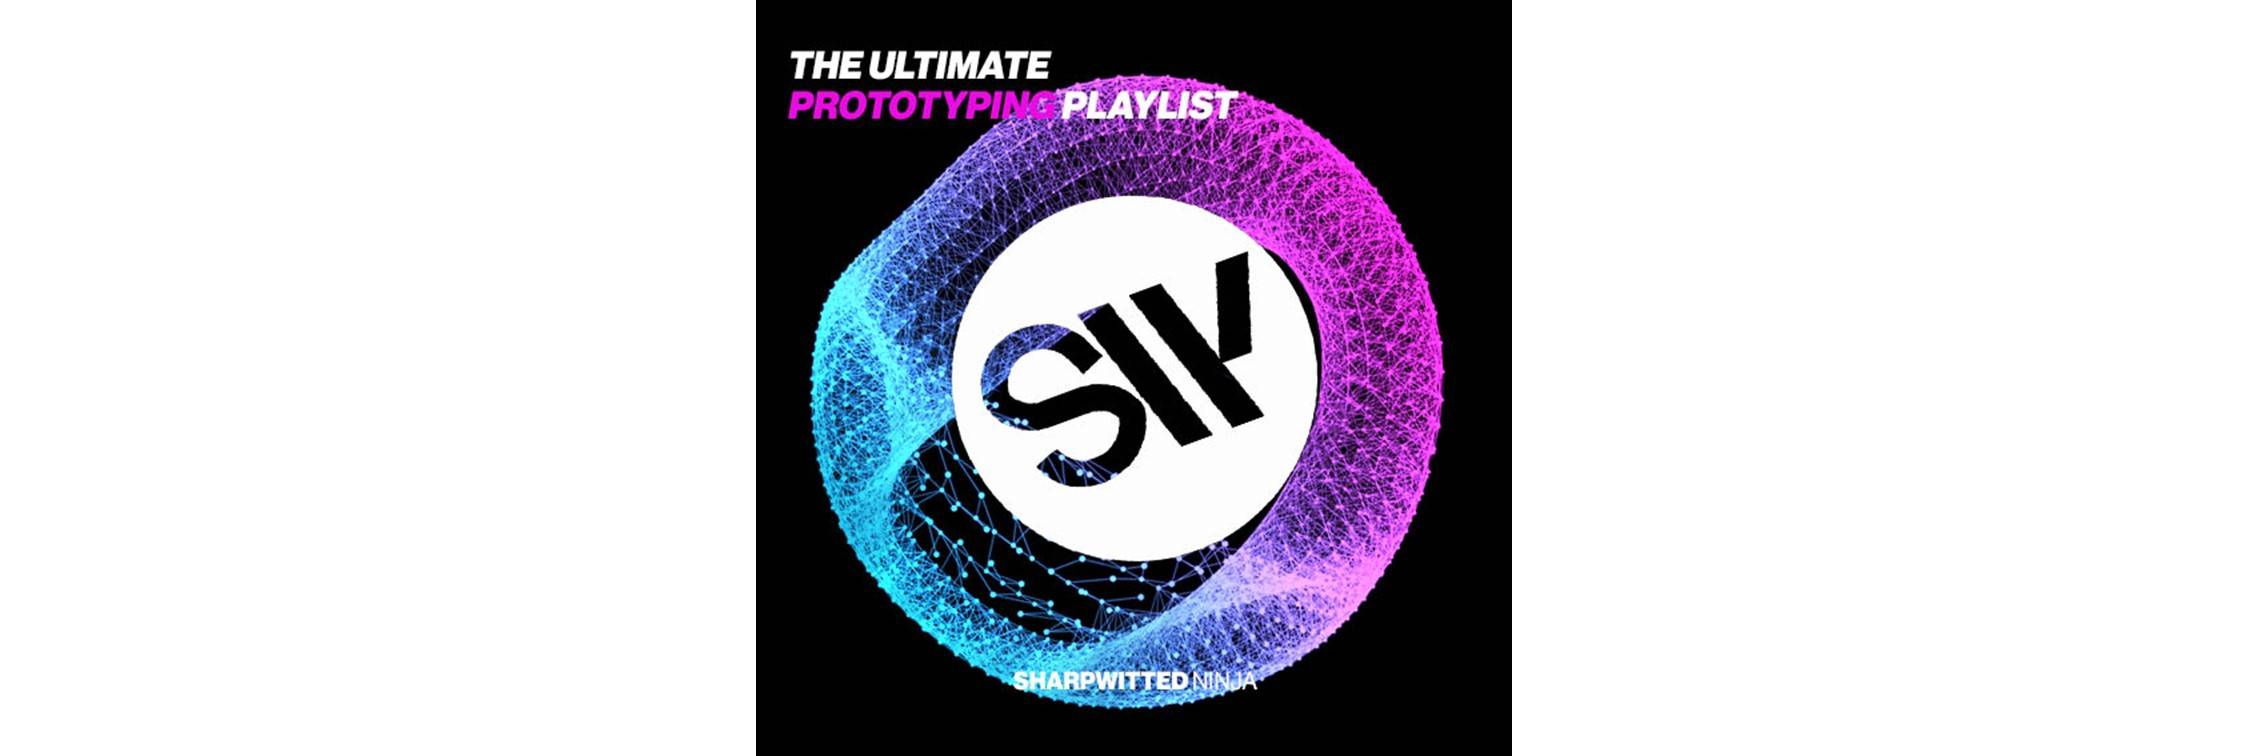 Sharpwitted Present: The Ultimate Prototyping Playlist. A list of songs that embody the essence of a great Prototype.